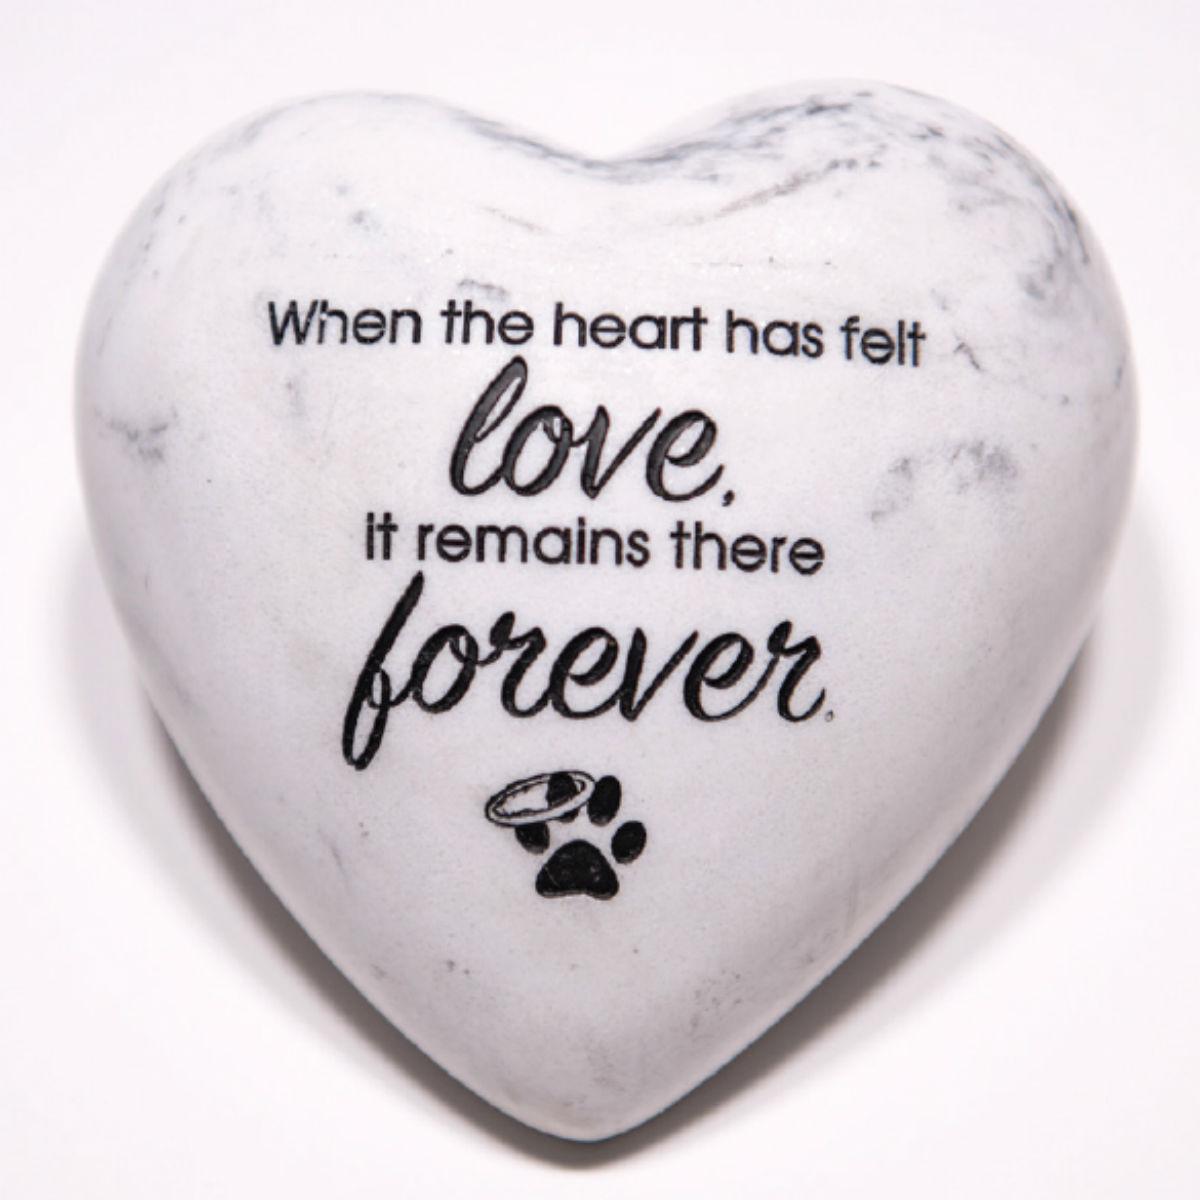 Dog Speak Inspirational Stone Paperweight - When the heart has felt love it remains...